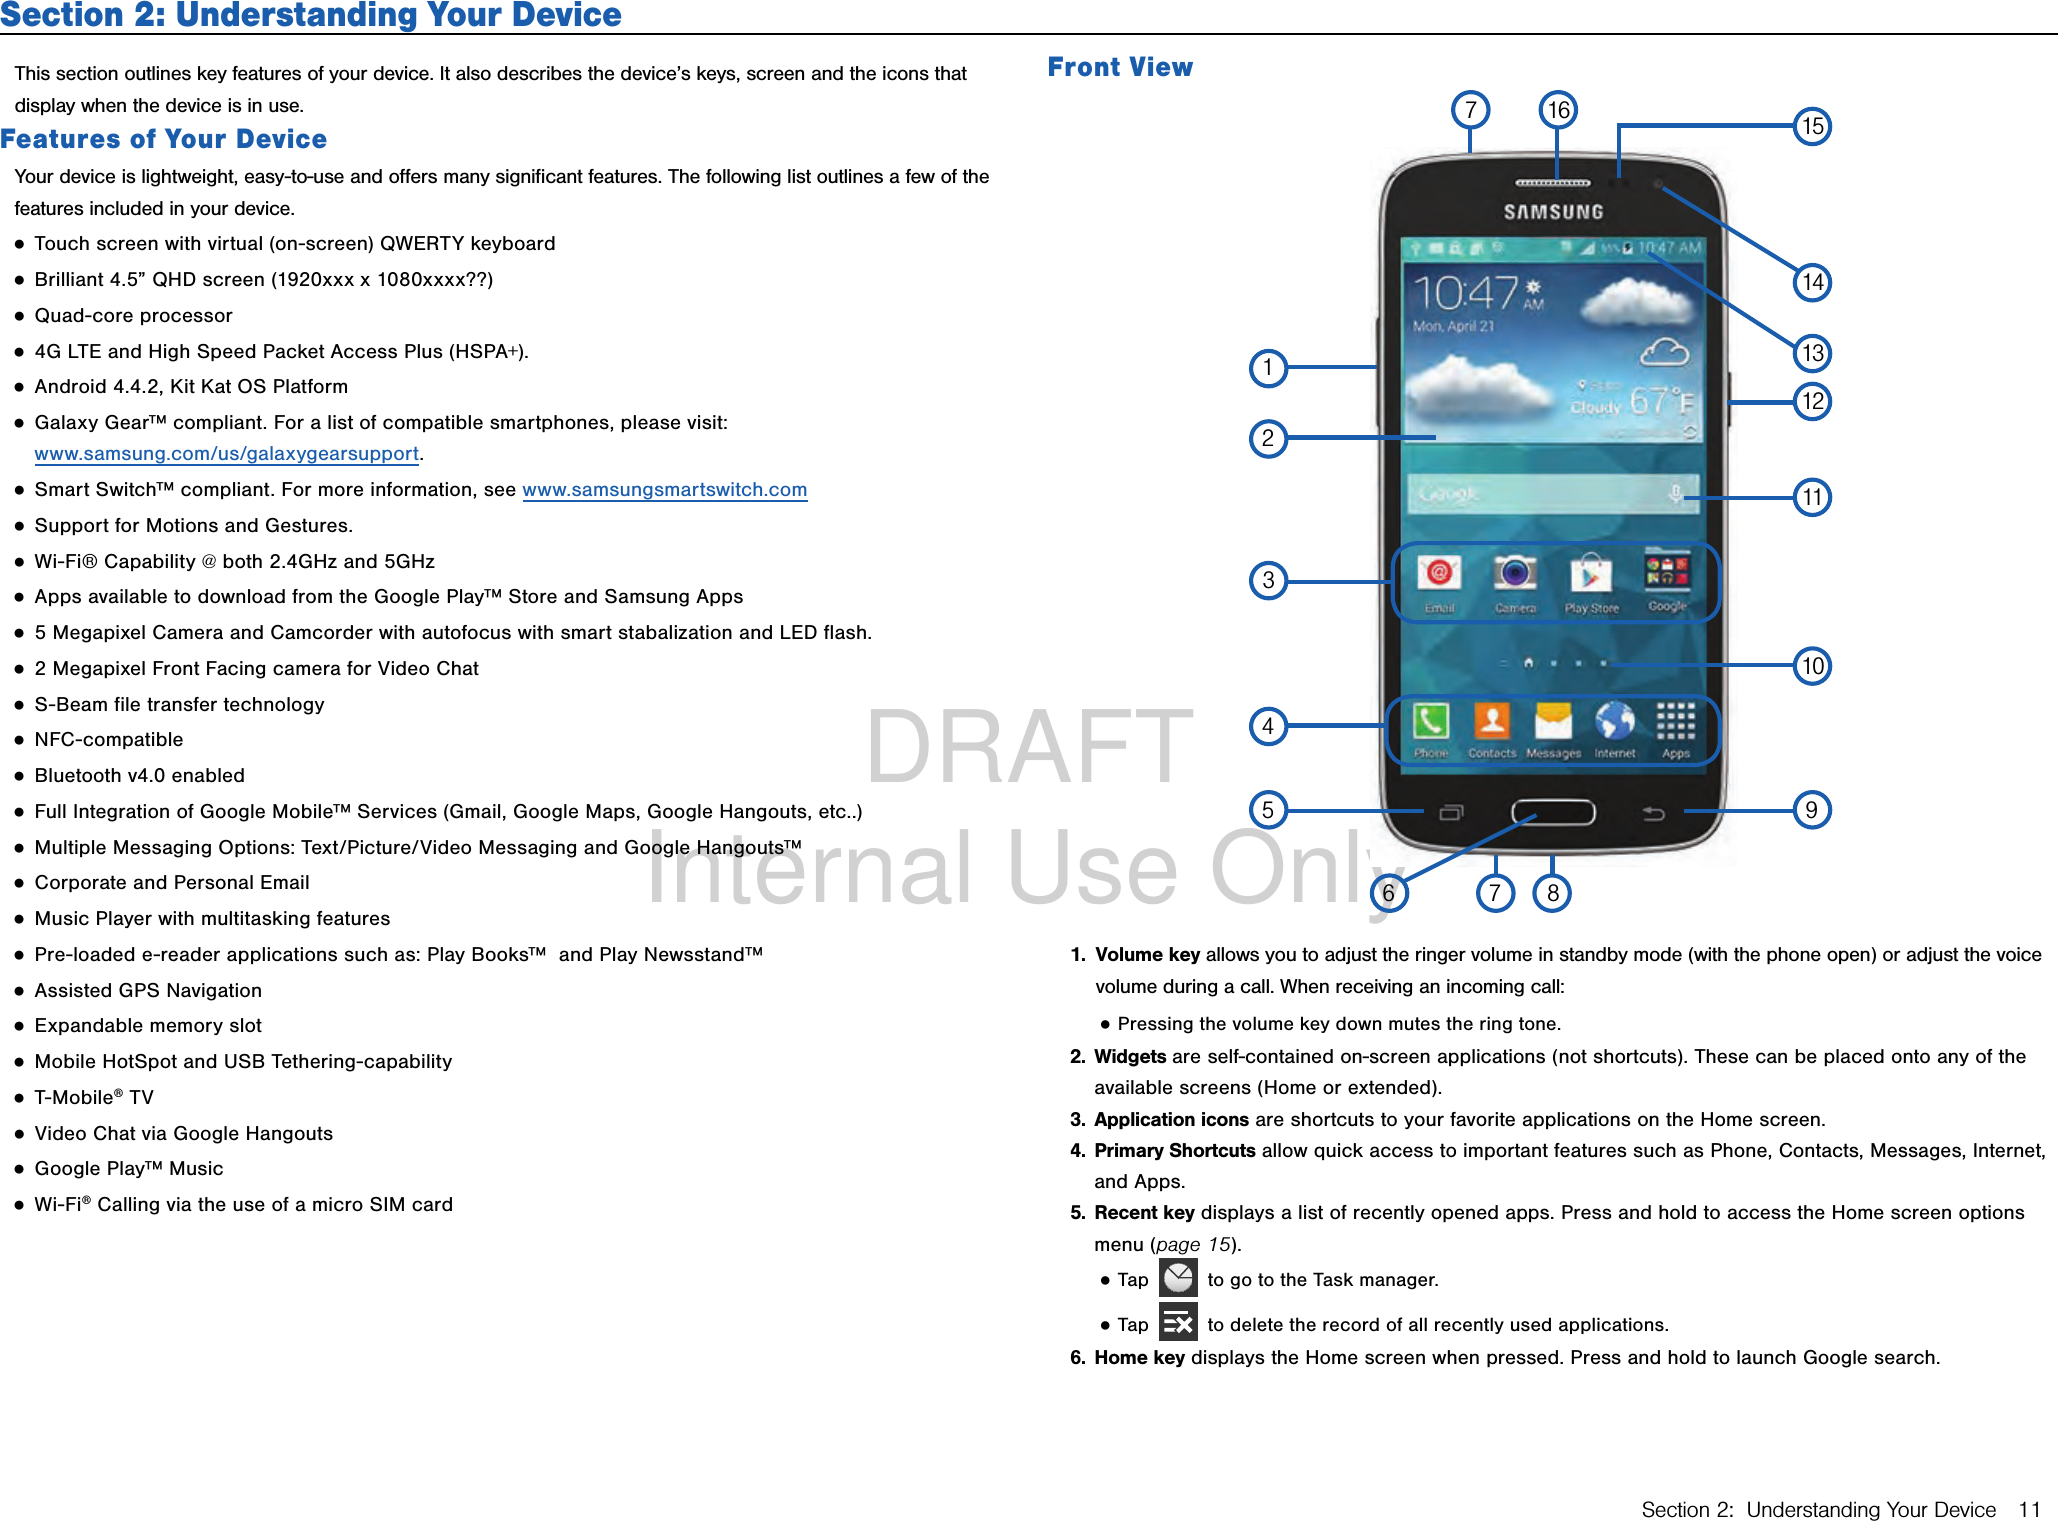 DRAFT Internal Use OnlySection 2:  Understanding Your Device 11Section 2: Understanding Your DeviceThis section outlines key features of your device. It also describes the device’s keys, screen and the icons that display when the device is in use.Features of Your DeviceYour device is lightweight, easy‑to‑use and oﬀers many signiﬁcant features. The following list outlines a few of the features included in your device. ●Touch screen with virtual (on‑screen) QWERTY keyboard ●Brilliant 4.5” QHD screen (1920xxx x 1080xxxx??) ●Quad‑core processor ●4G LTE and High Speed Packet Access Plus (HSPA+). ●Android 4.4.2, Kit Kat OS Platform ●Galaxy Gear™ compliant. For a list of compatible smartphones, please visit:  www.samsung.com/us/galaxygearsupport. ●Smart Switch™ compliant. For more information, see www.samsungsmartswitch.com ●Support for Motions and Gestures. ●Wi‑Fi® Capability @ both 2.4GHz and 5GHz ●Apps available to download from the Google Play™ Store and Samsung Apps ●5 Megapixel Camera and Camcorder with autofocus with smart stabalization and LED flash.  ●2 Megapixel Front Facing camera for Video Chat ●S‑Beam file transfer technology ●NFC‑compatible ●Bluetooth v4.0 enabled ●Full Integration of Google Mobile™ Services (Gmail, Google Maps, Google Hangouts, etc..) ●Multiple Messaging Options: Text/Picture/Video Messaging and Google Hangouts™ ●Corporate and Personal Email ●Music Player with multitasking features ●Pre‑loaded e‑reader applications such as: Play Books™  and Play Newsstand™ ●Assisted GPS Navigation ●Expandable memory slot ●Mobile HotSpot and USB Tethering‑capability ●T‑Mobile® TV ●Video Chat via Google Hangouts ●Google Play™ Music ●Wi‑Fi® Calling via the use of a micro SIM cardFront View12345 91110121314151676781.  Volume key allows you to adjust the ringer volume in standby mode (with the phone open) or adjust the voice volume during a call. When receiving an incoming call: ●Pressing the volume key down mutes the ring tone. 2.  Widgets are self‑contained on‑screen applications (not shortcuts). These can be placed onto any of the available screens (Home or extended). 3.  Application icons are shortcuts to your favorite applications on the Home screen.4.  Primary Shortcuts allow quick access to important features such as Phone, Contacts, Messages, Internet, and Apps.5.  Recent key displays a list of recently opened apps. Press and hold to access the Home screen options menu (page 15). ●Tap   to go to the Task manager. ●Tap   to delete the record of all recently used applications. 6.  Home key displays the Home screen when pressed. Press and hold to launch Google search.